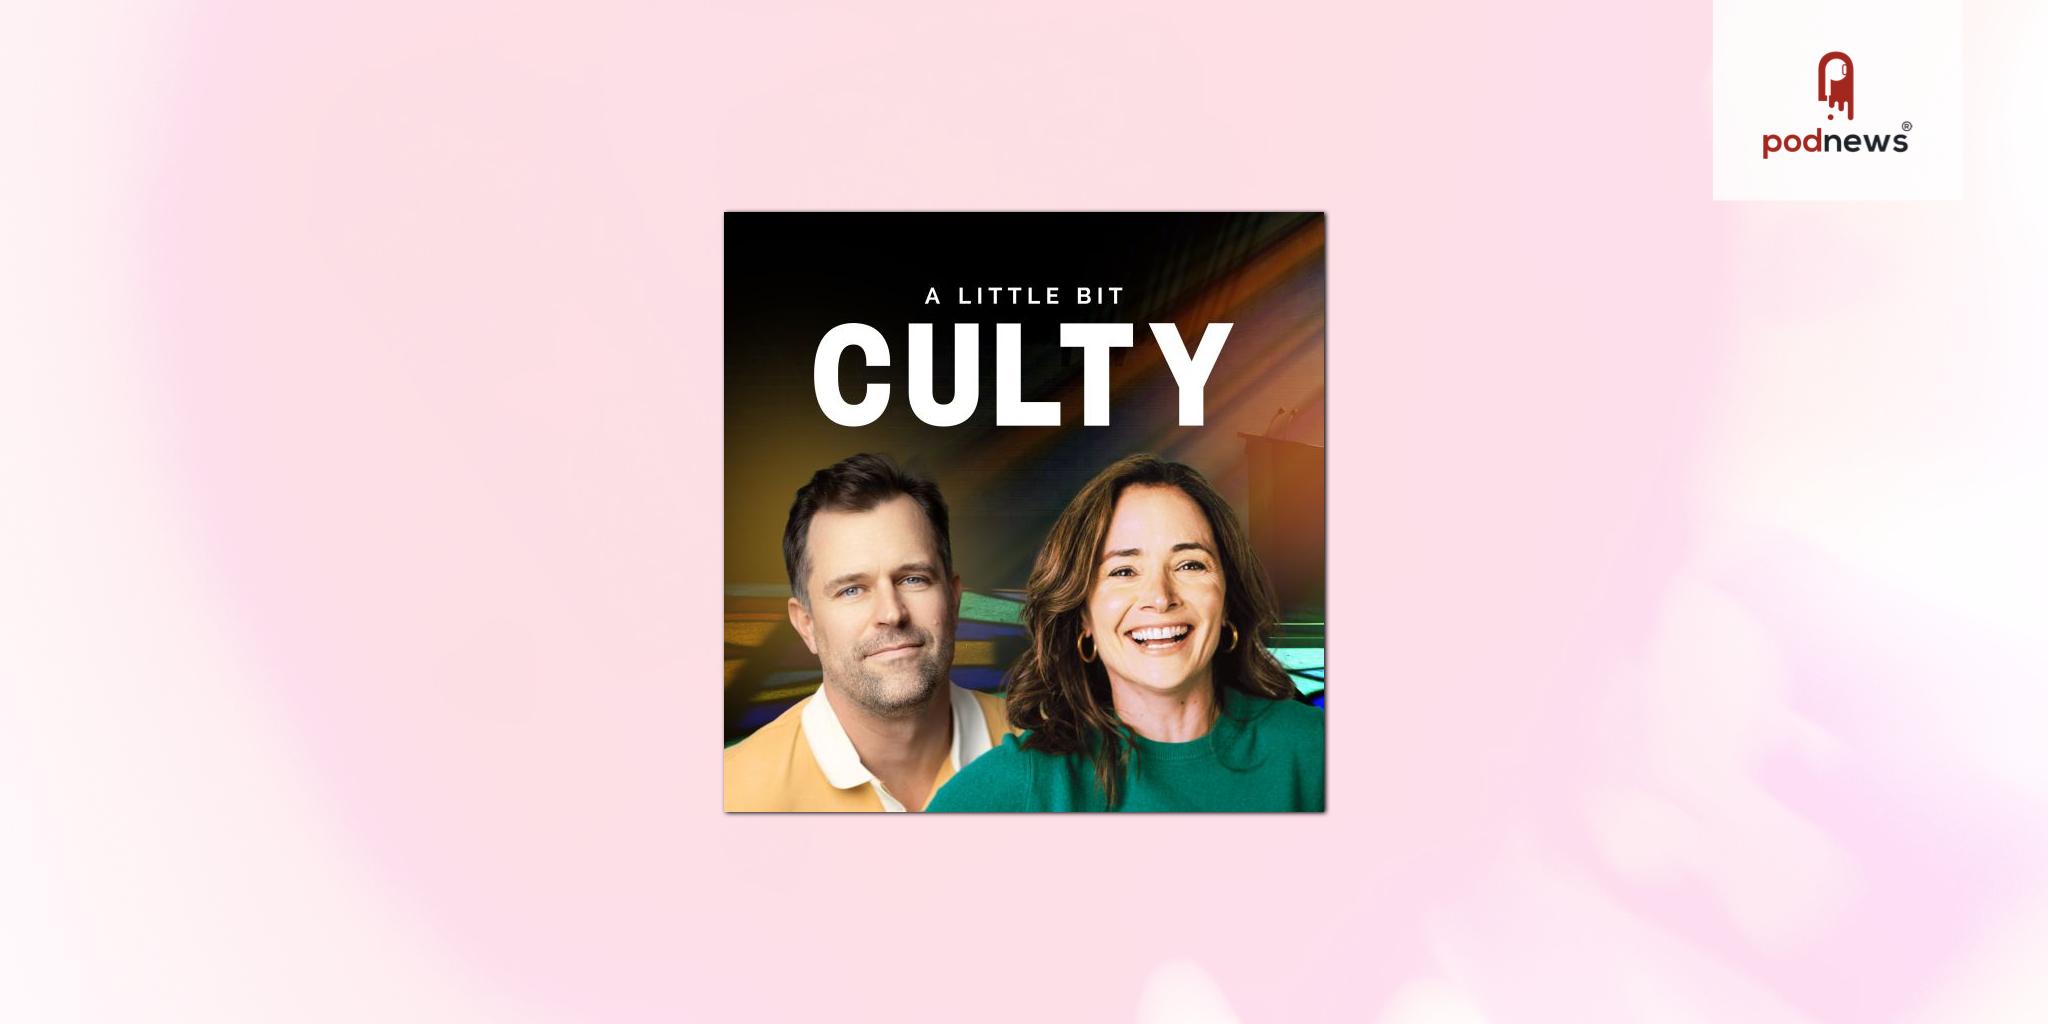 A Little Bit Culty podcast signs to Acast, returns for Season 2